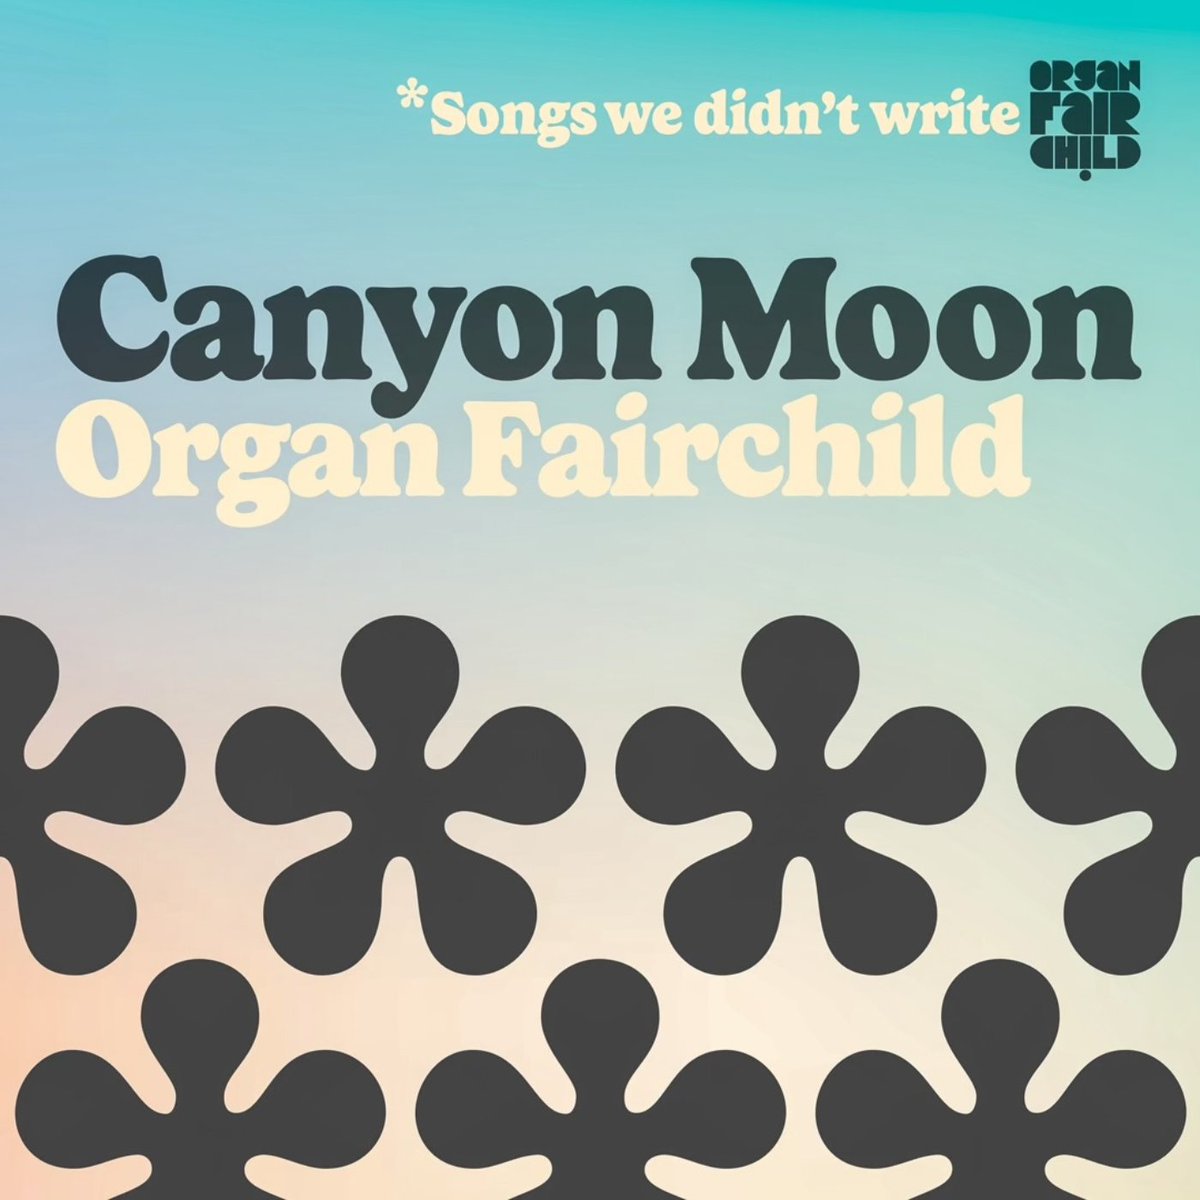 Please welcome to the world 'Canyon Moon,' a re-imagined #HarryStyles #MitchRowland #KidHarpoon song from the Songs We Didn't Write album (out 6.07.24)!!

We discovered it through Corey's daughter and had an absolute blast making it our own.

LISTEN: ffm.to/canyonmoon